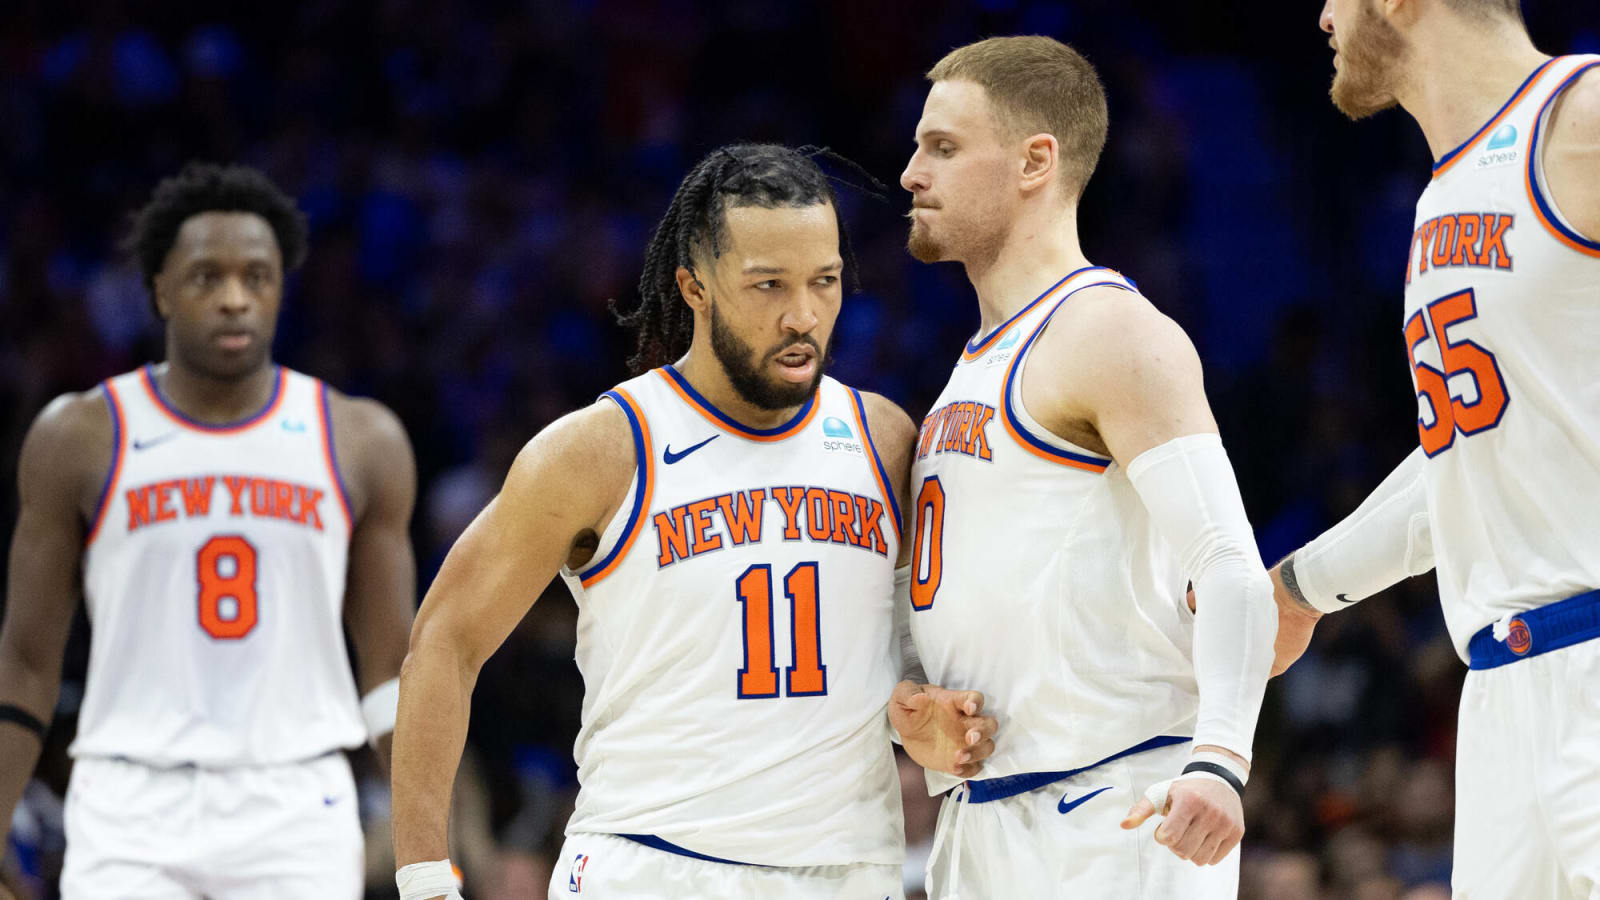 New York Knicks: Jalen Brunson Goes Full Michael Jordan With 41-Point Explosion in Game 6 Close-Out of 76ers